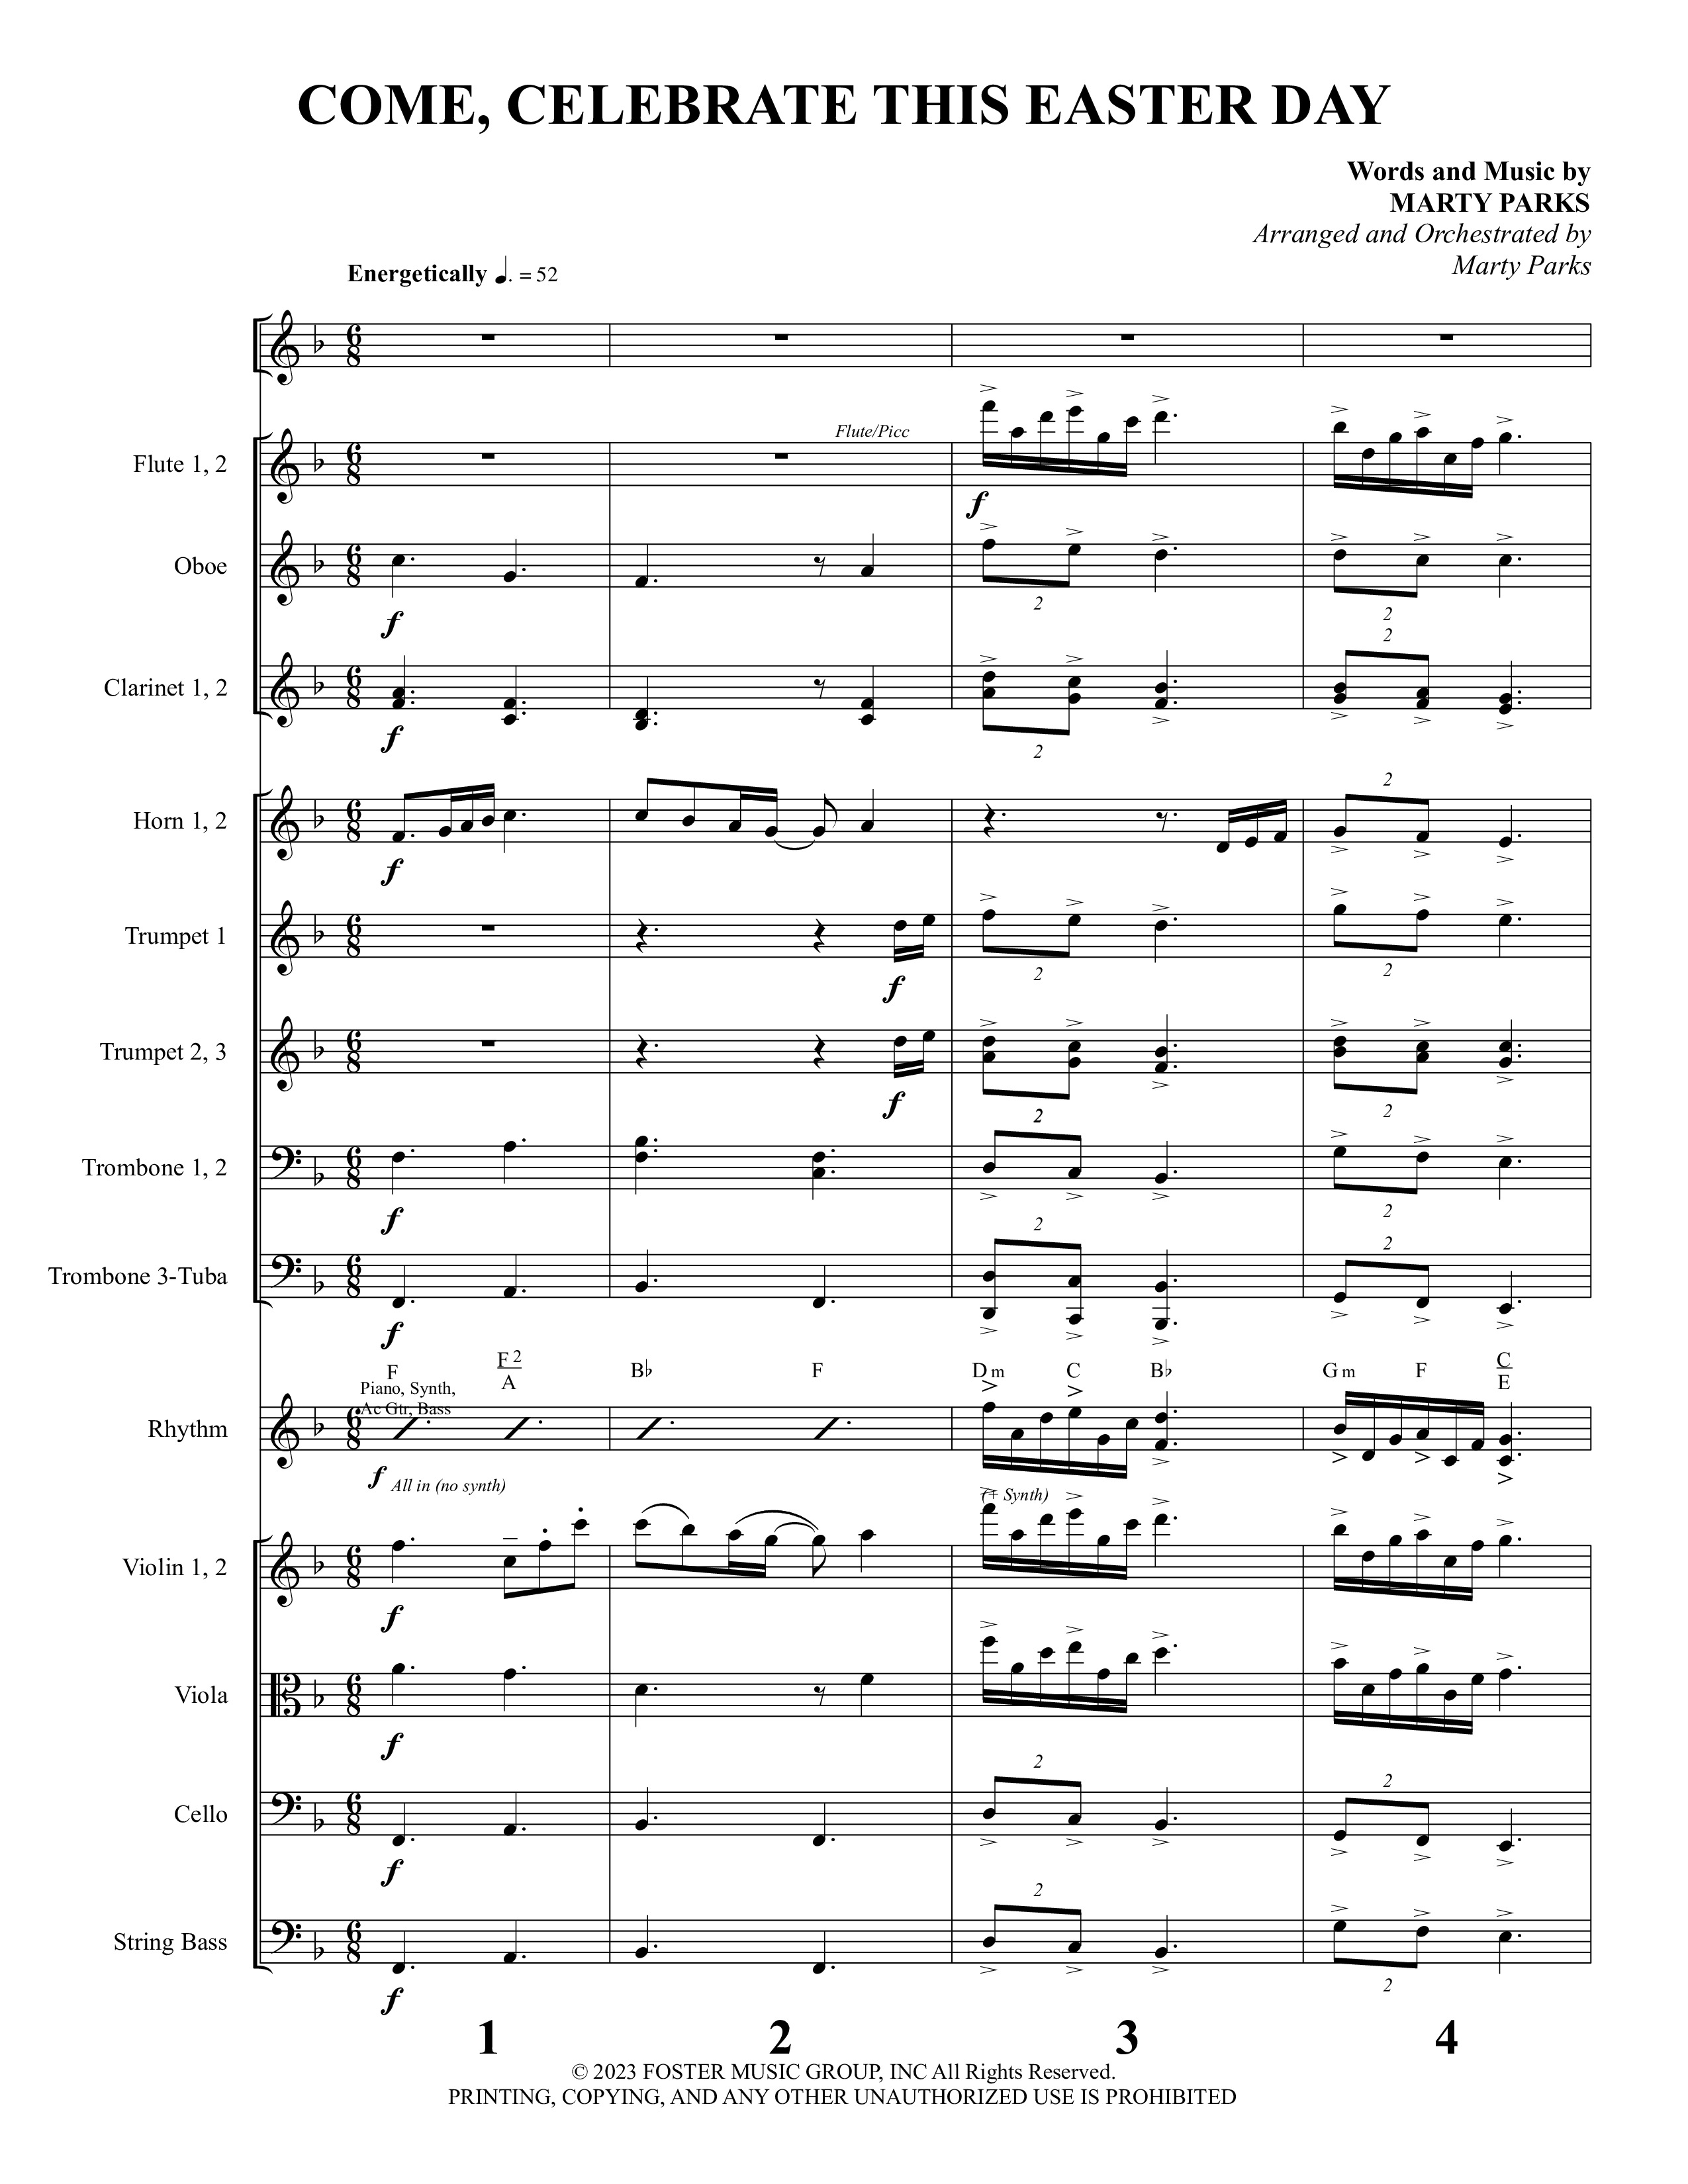 Come Celebrate This Easter Day (Choral Anthem SATB) Orchestration (Foster Music Group / Arr. Marty Parks)